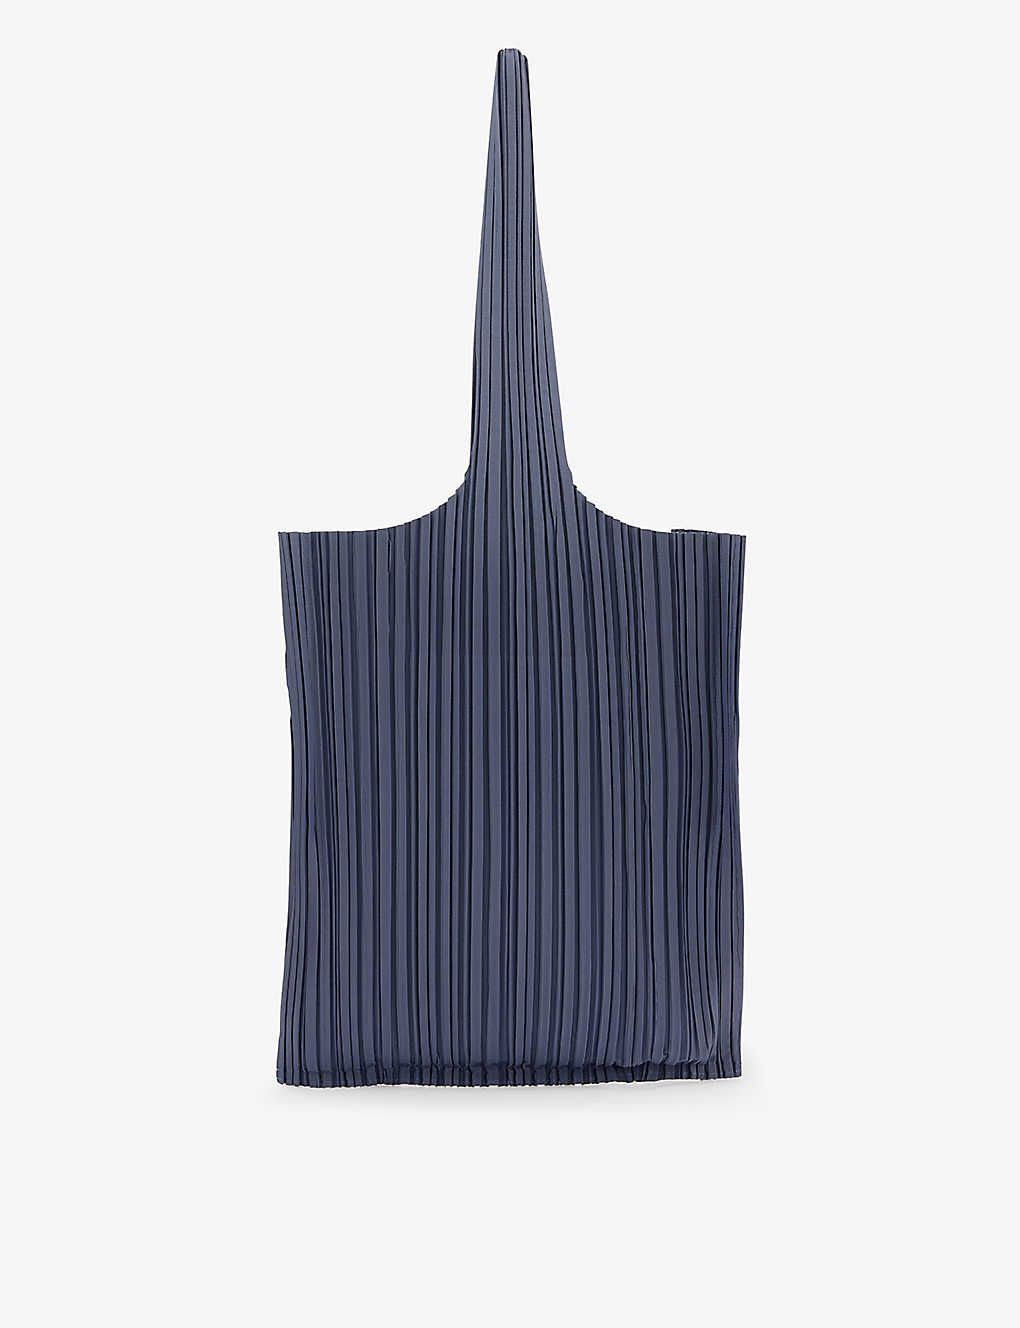 Pleats Please Issey Miyake Pleated Woven Tote Bag in Black